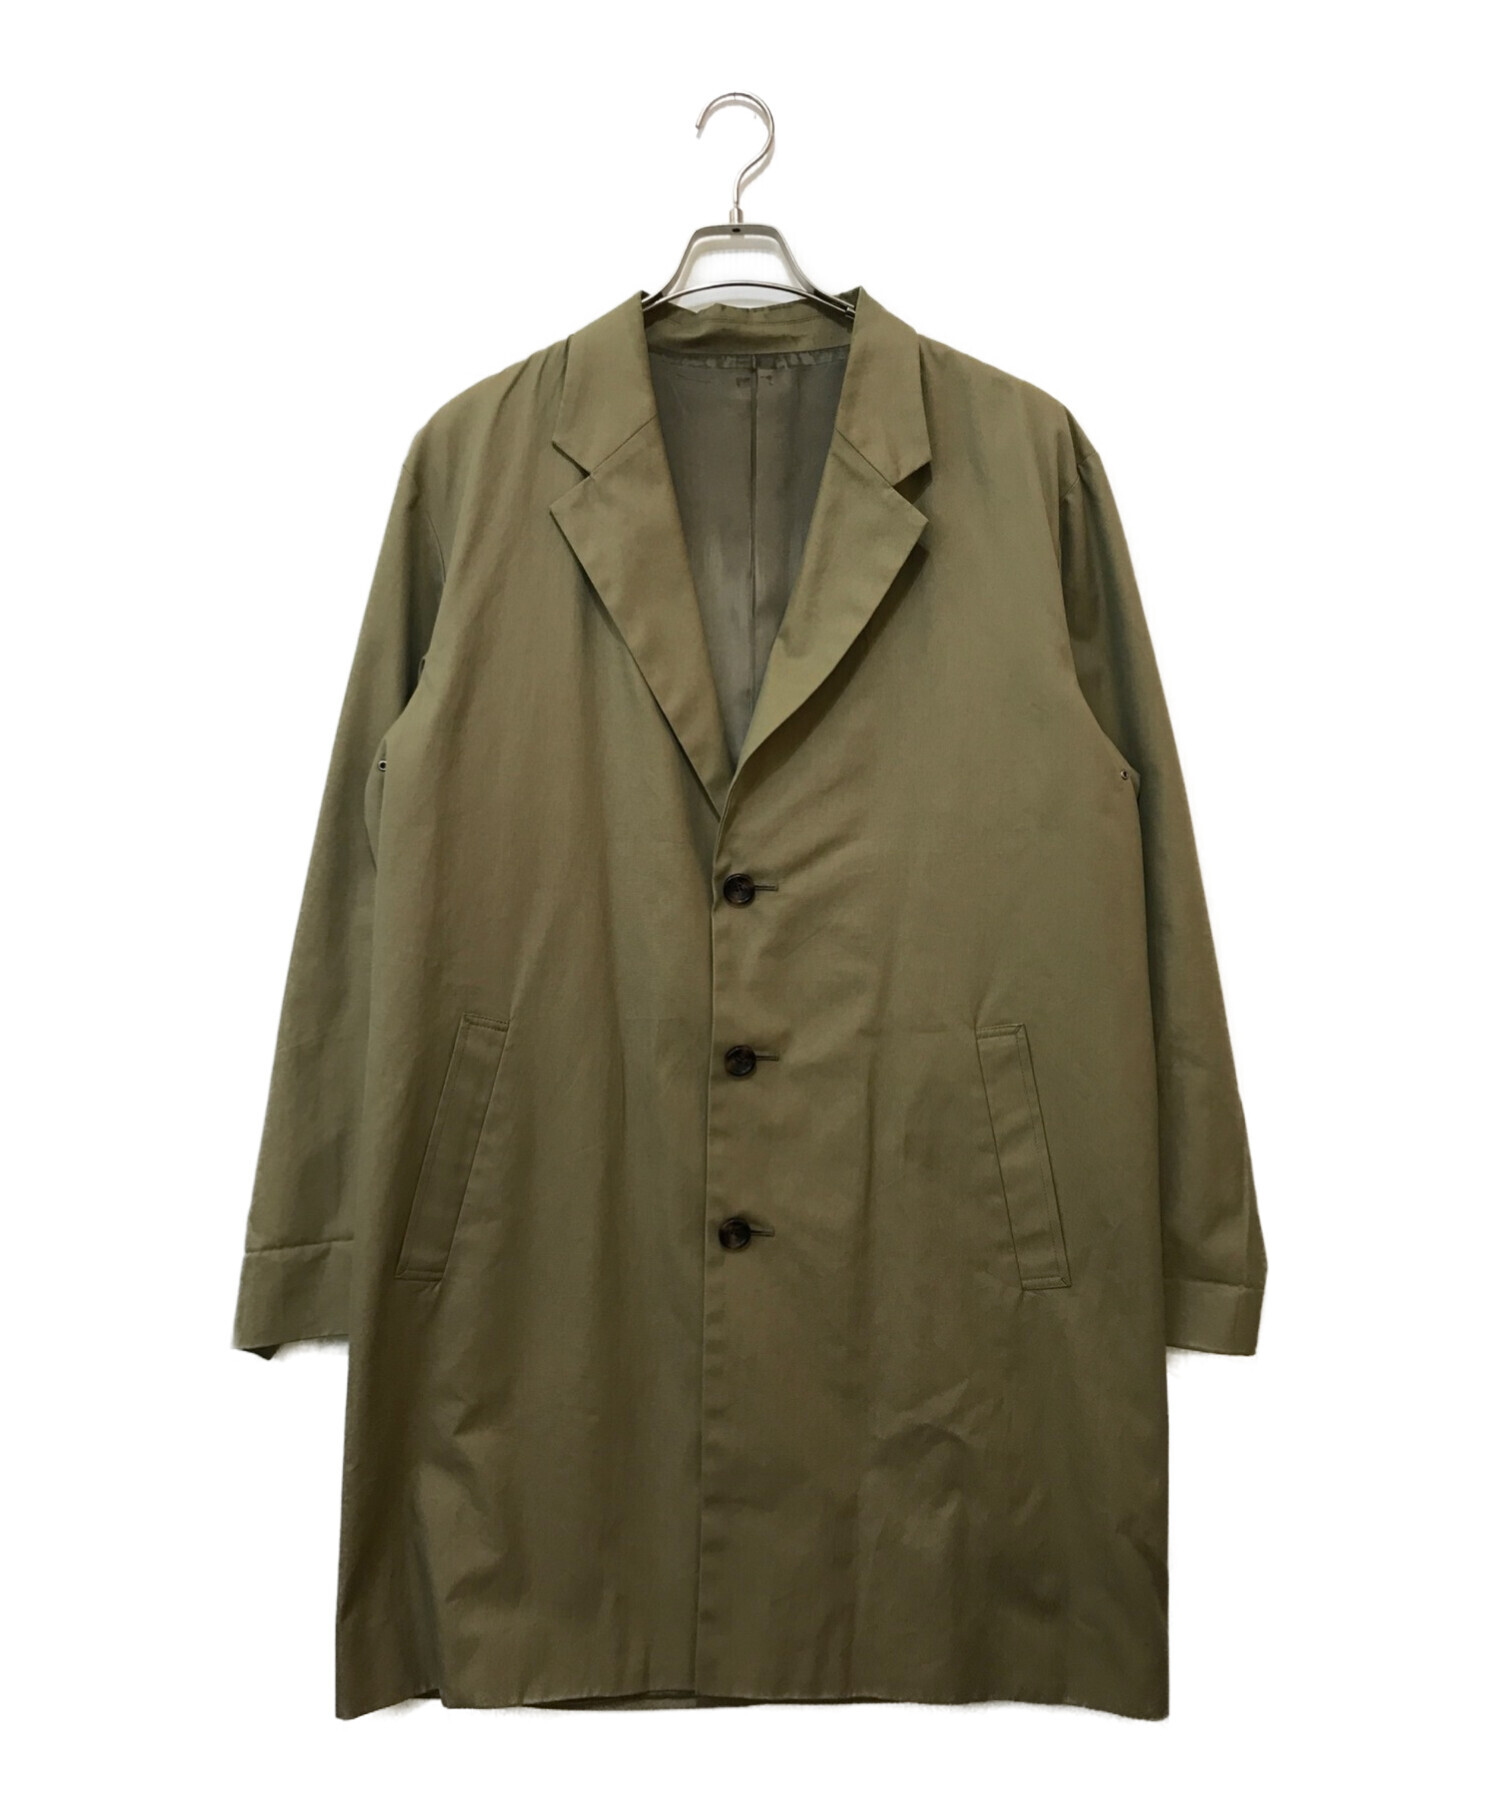 SOPHNET. CHESTER FIELD JACKET チェスターコート - その他